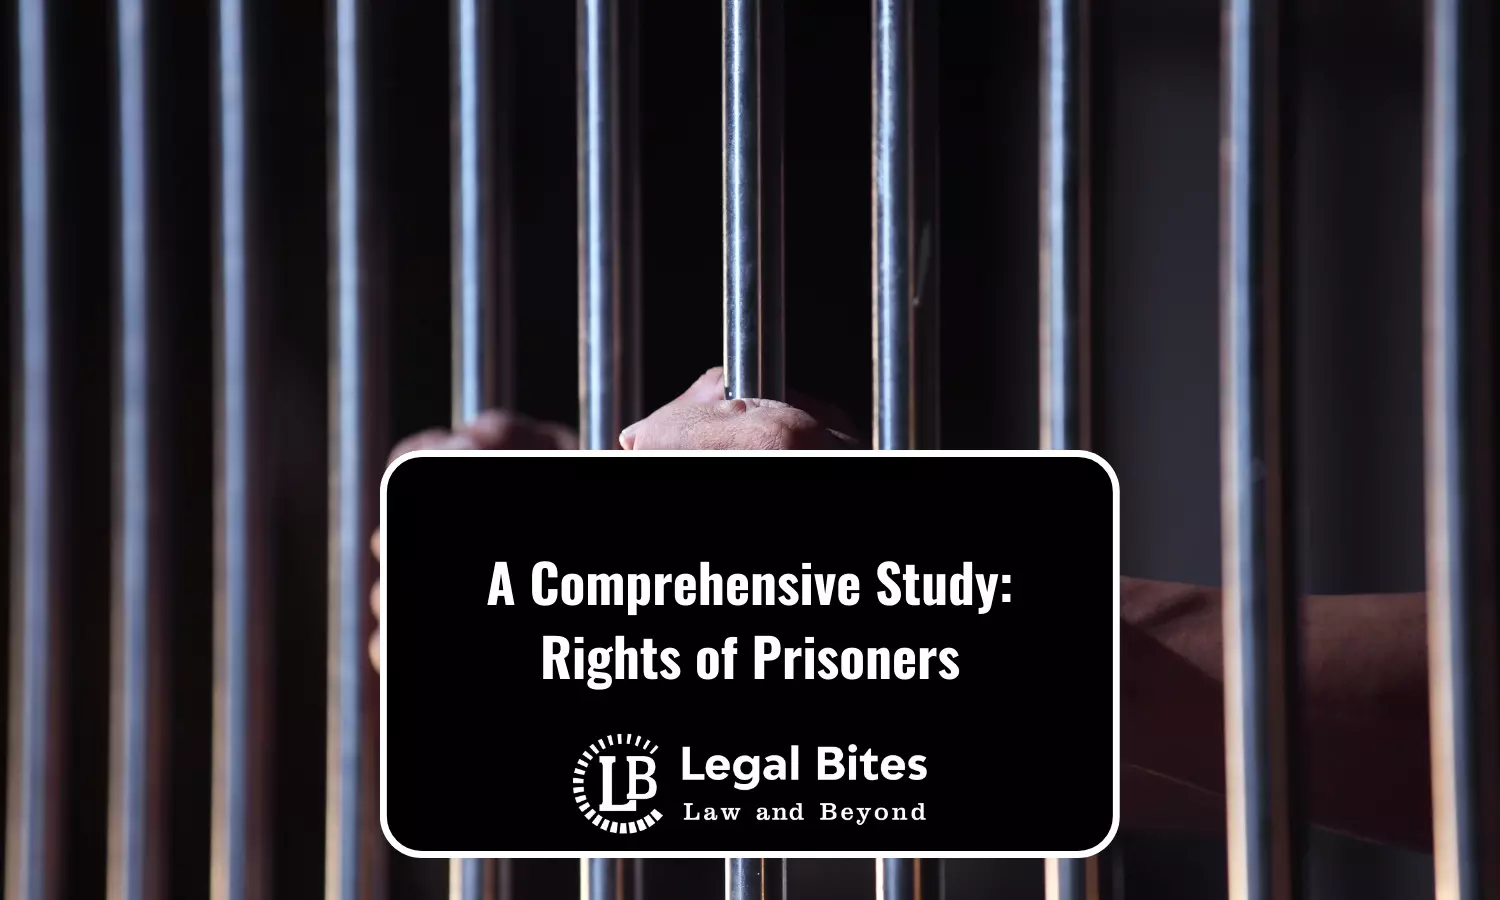 A Comprehensive Study about the Rights of Prisoners